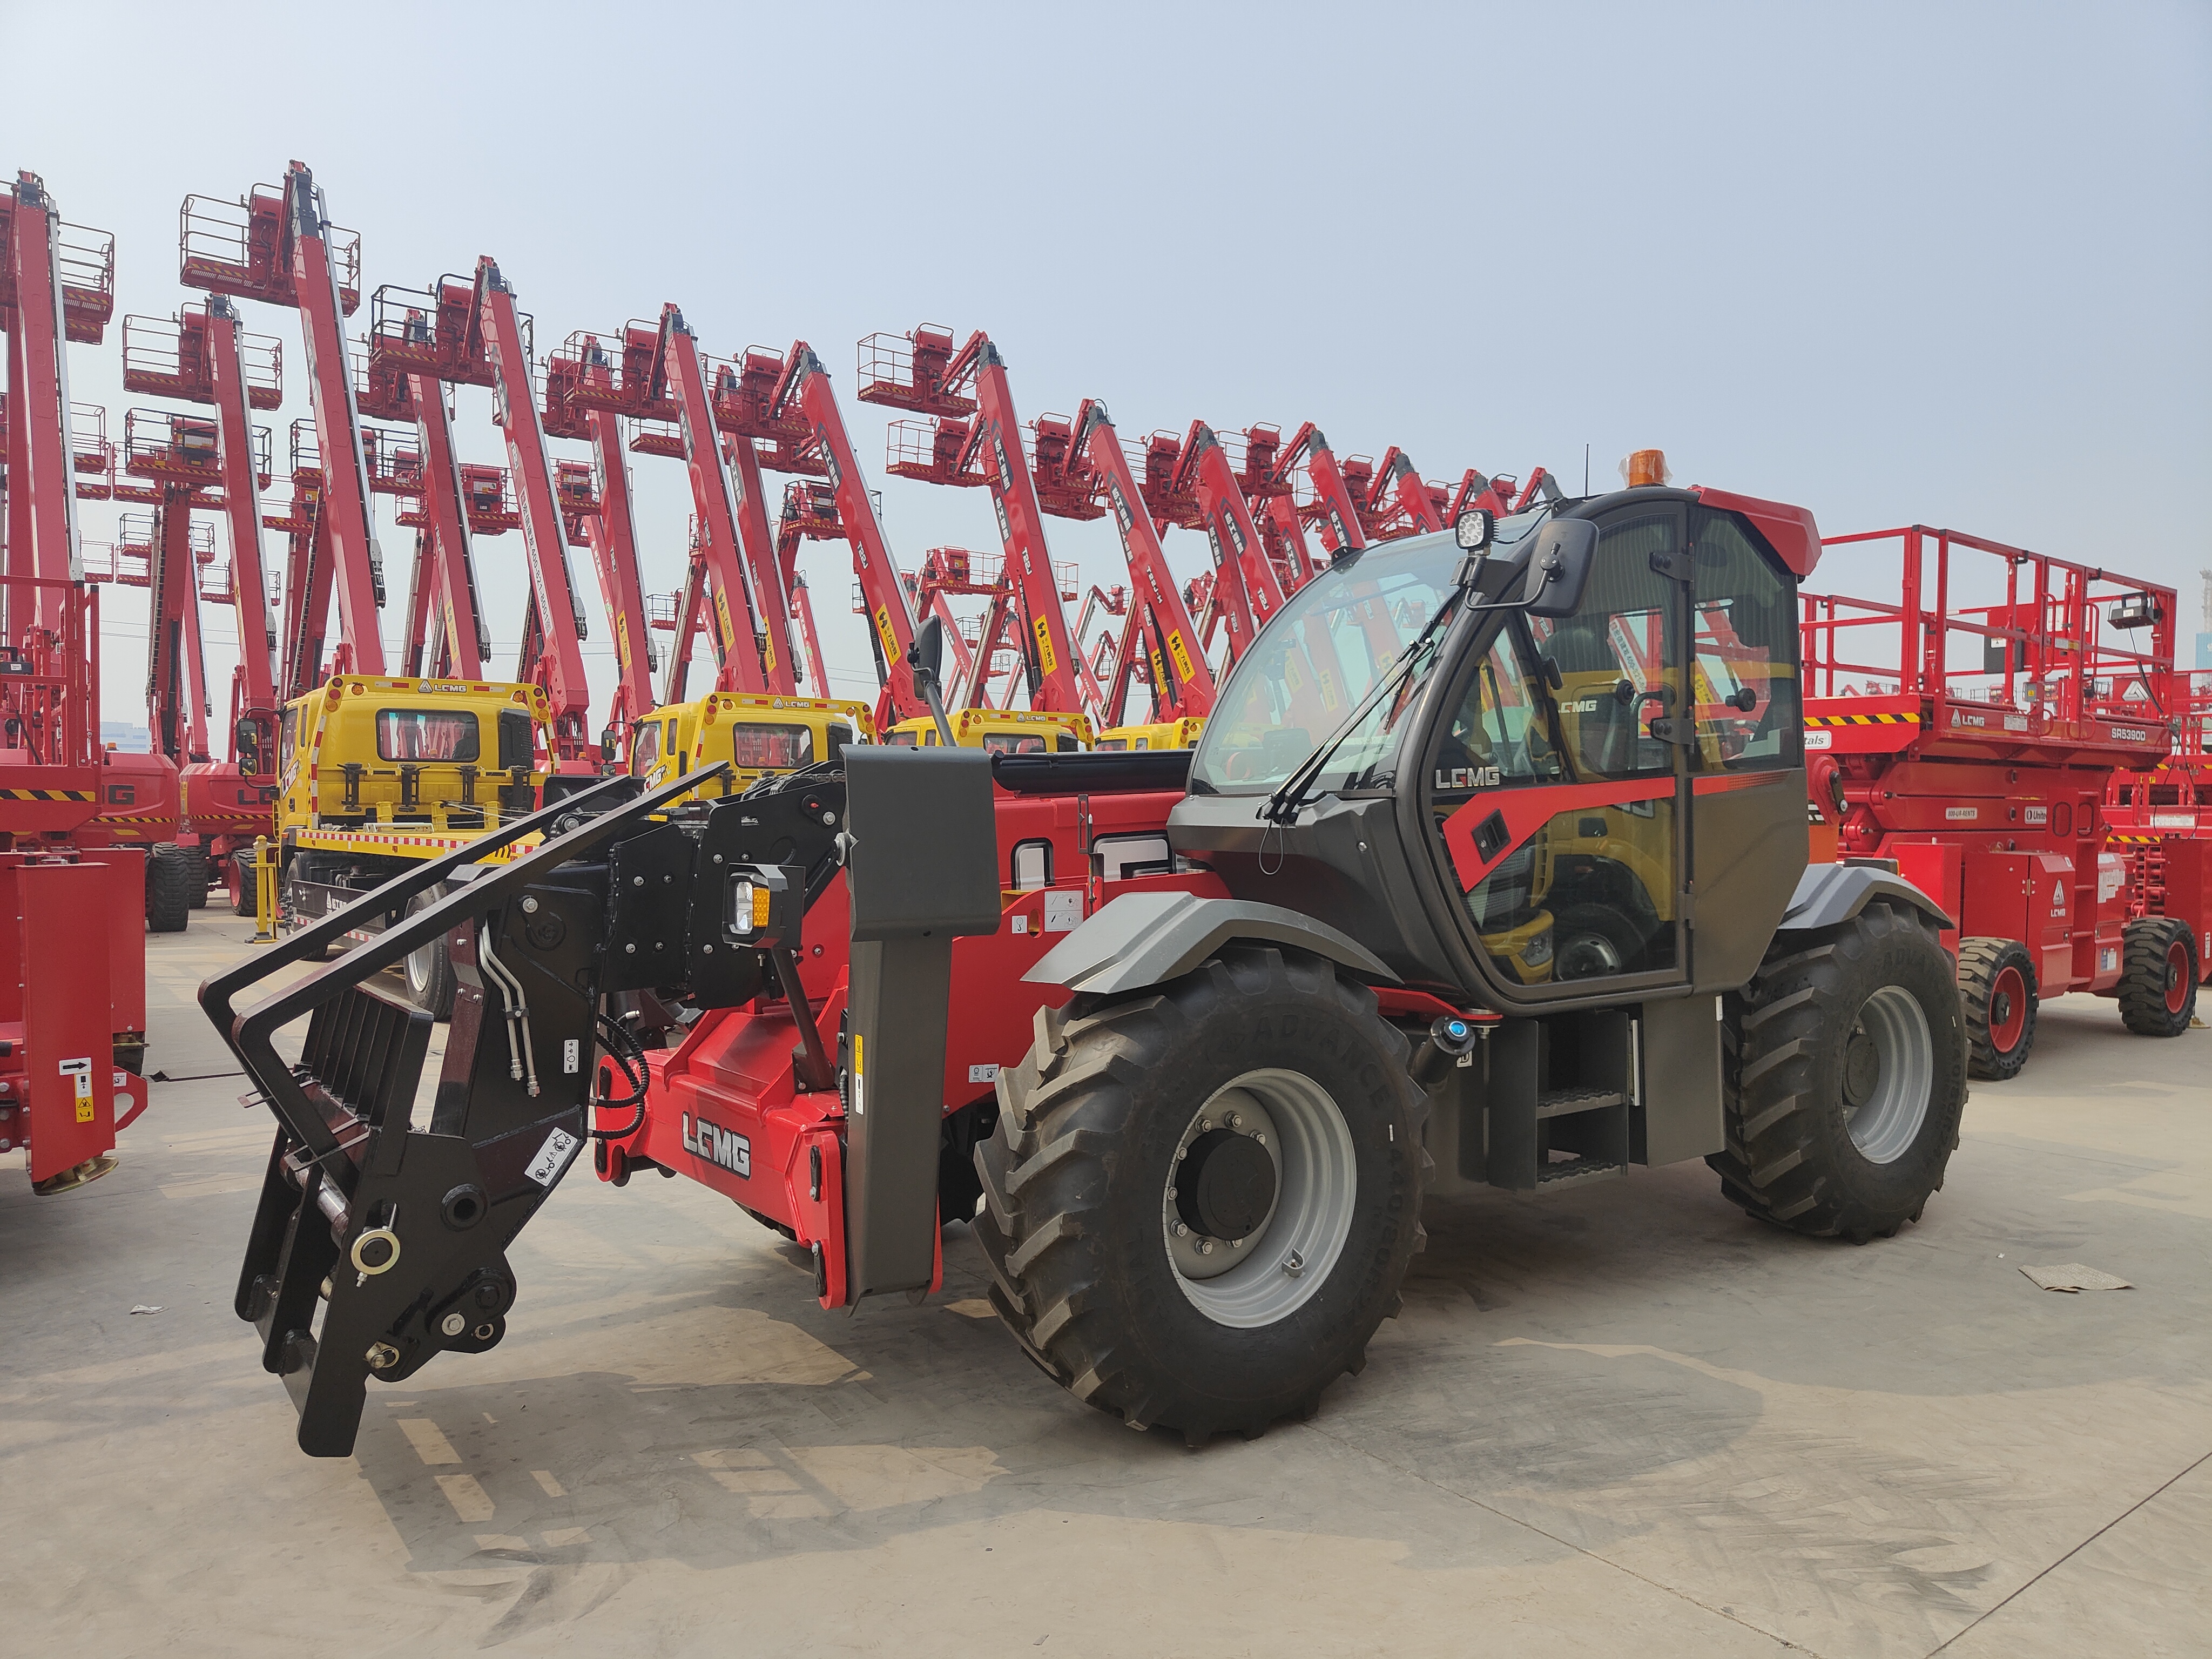 Within the trade fair LGMG presented first telescopic loader H-1840 in Russia